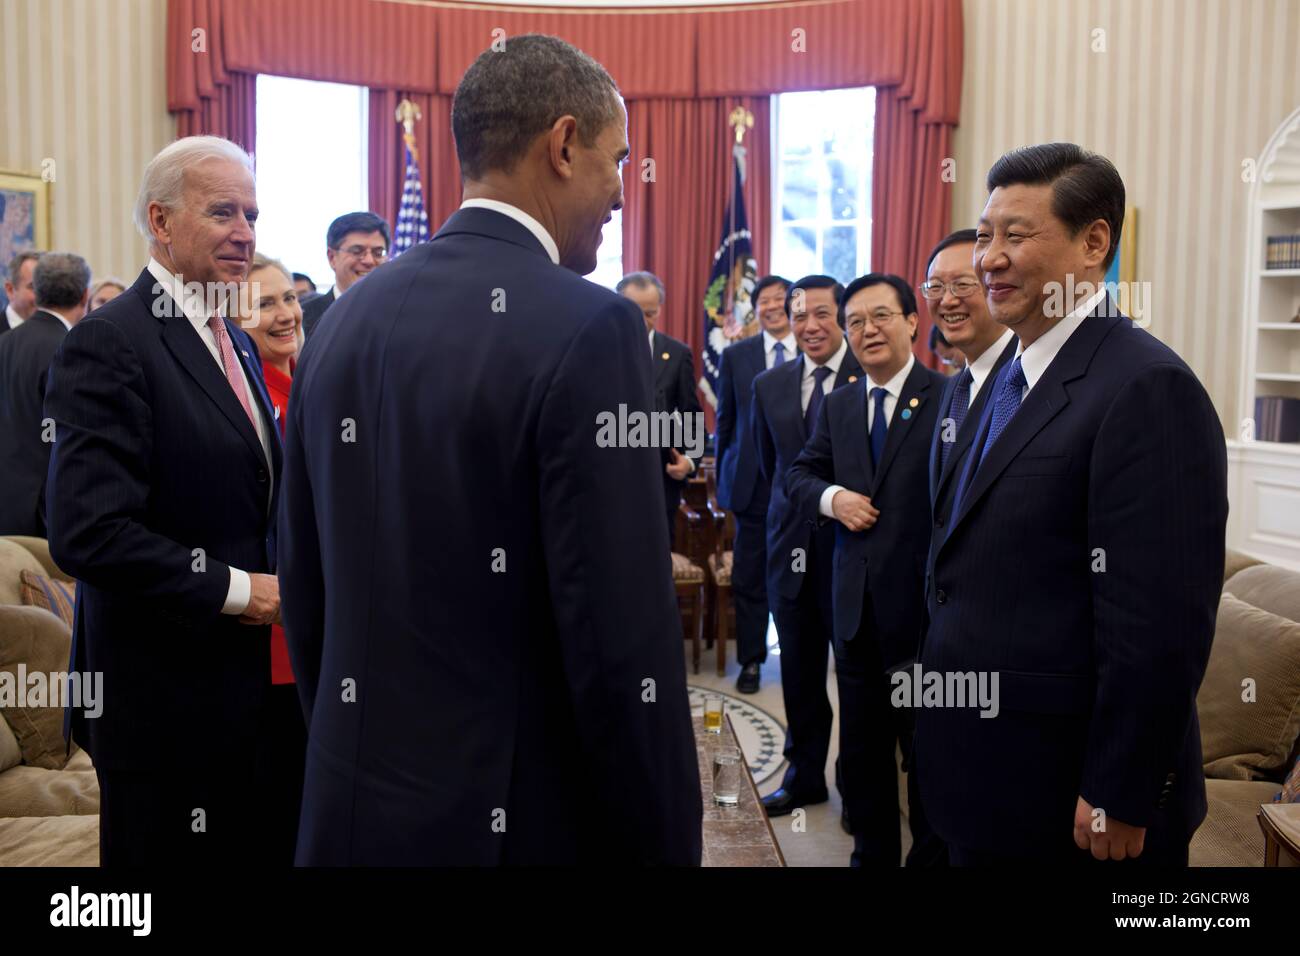 President Barack Obama and Vice President Joe Biden talk with Vice President Xi Jinping of the People’s Republic of China and members of the Chinese delegation following their bilateral meeting in the Oval Office, Feb. 14, 2012. (Official White House Photo by Pete Souza) This official White House photograph is being made available only for publication by news organizations and/or for personal use printing by the subject(s) of the photograph. The photograph may not be manipulated in any way and may not be used in commercial or political materials, advertisements, emails, products, promotions th Stock Photo